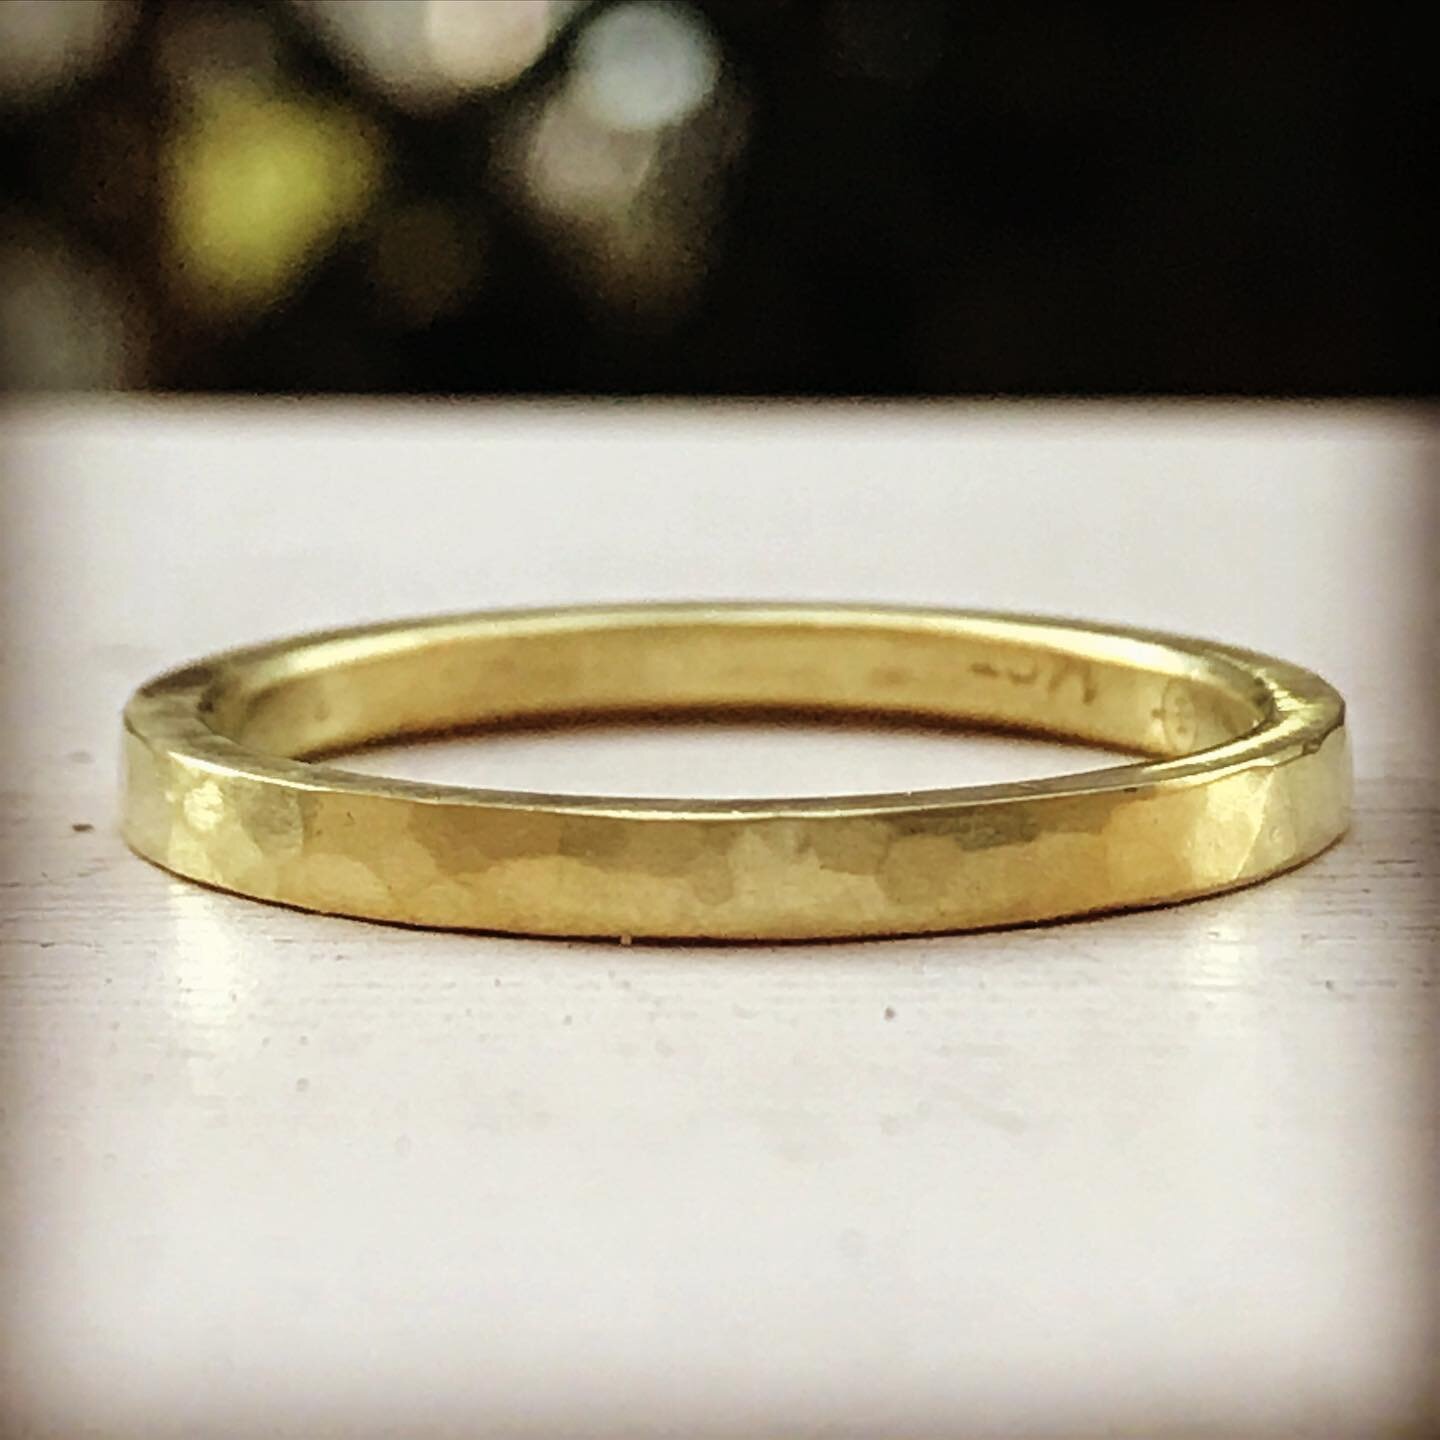 Simple gold stacking ring made from recycled 14ct yellow gold, great re-use for sentimental gold jewellery that&rsquo;s sitting in your jewellery box broken or unworn&hellip;. An easy everyday ring.  #perthjeweller #recycle #rejuvenate #northperth